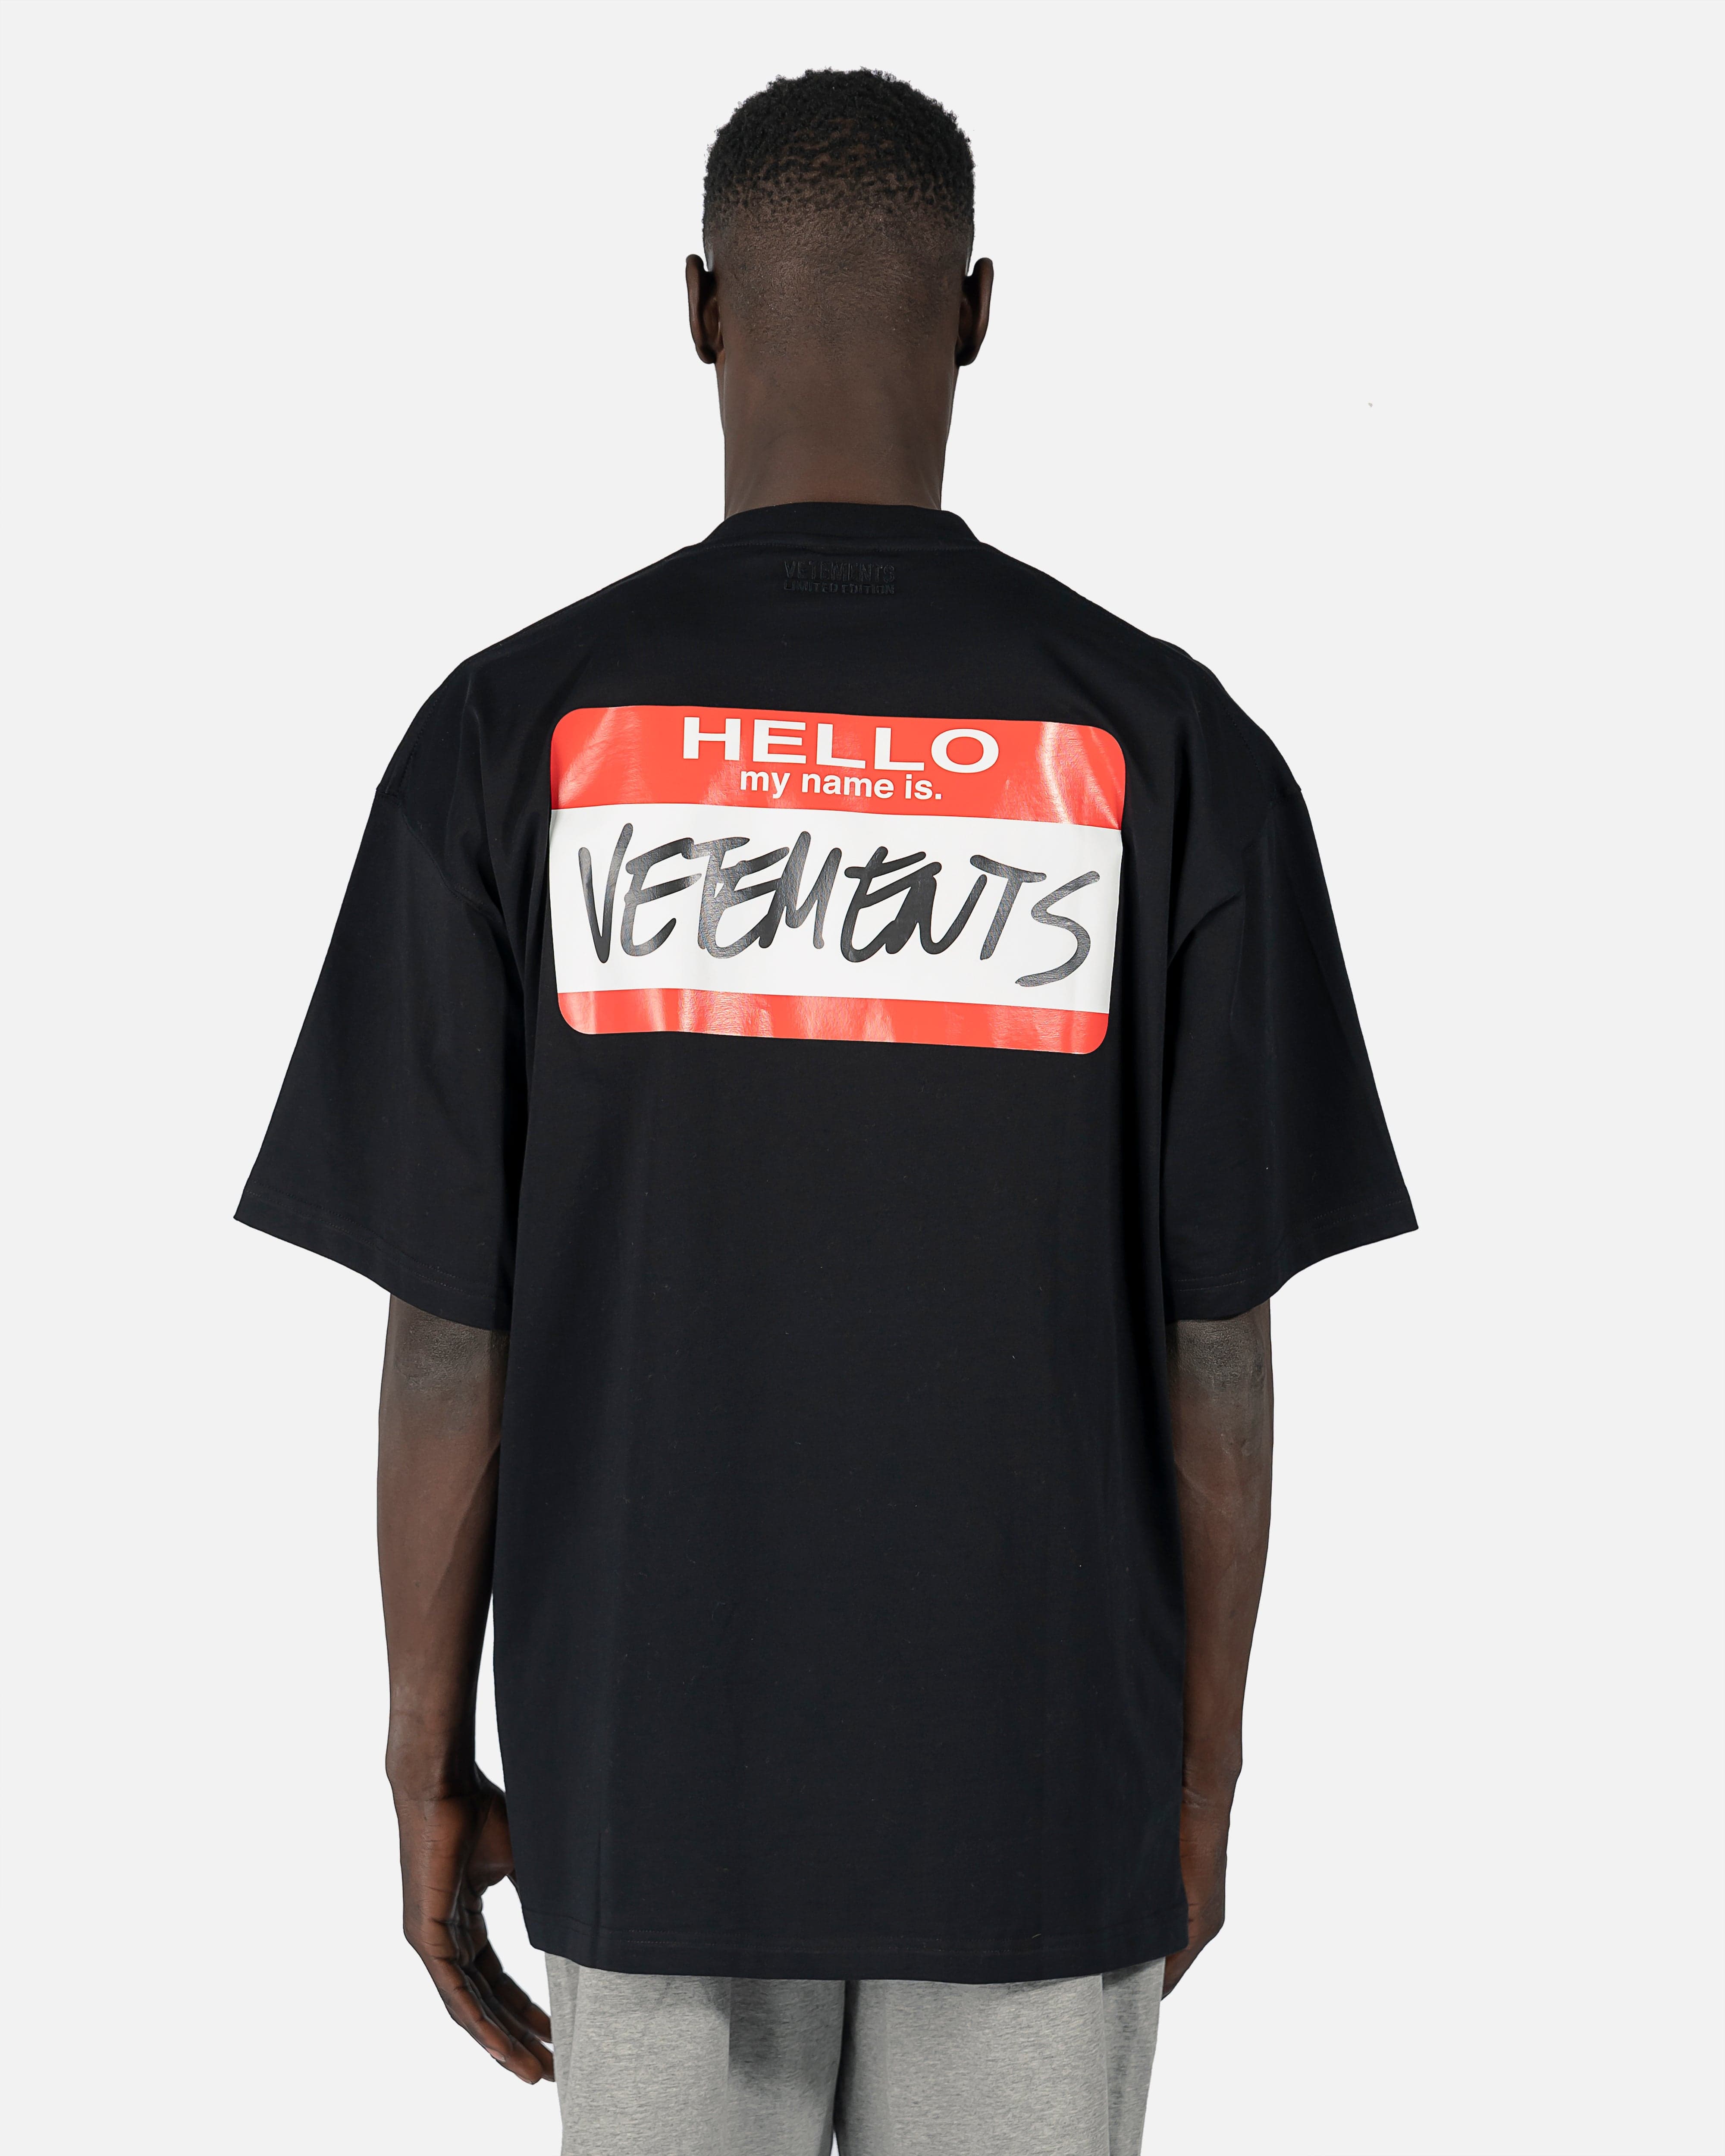 My Name is VETEMENTS T-Shirt in Black